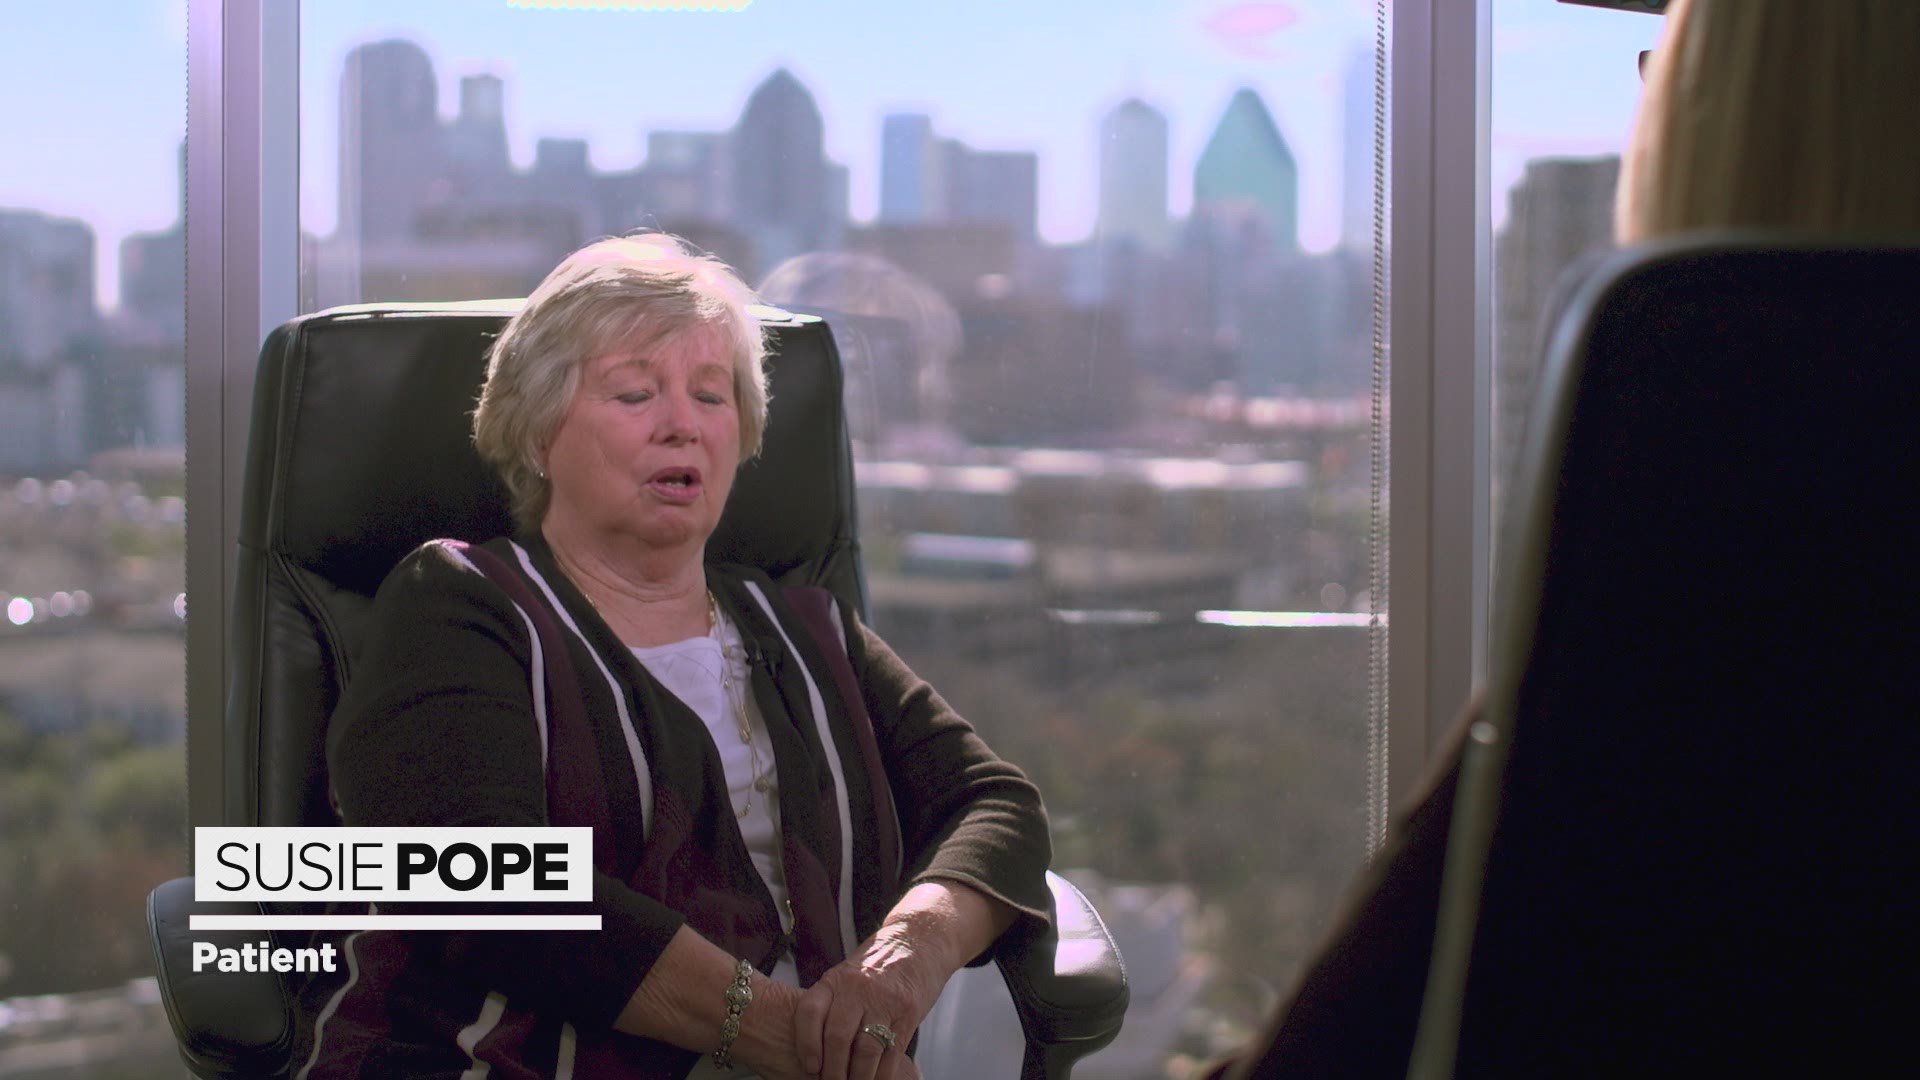 Susie Pope, who was among dozens of patients who suffered adverse reactions to an eye injection,  talks about what she wishes she would've asked before the procedure.